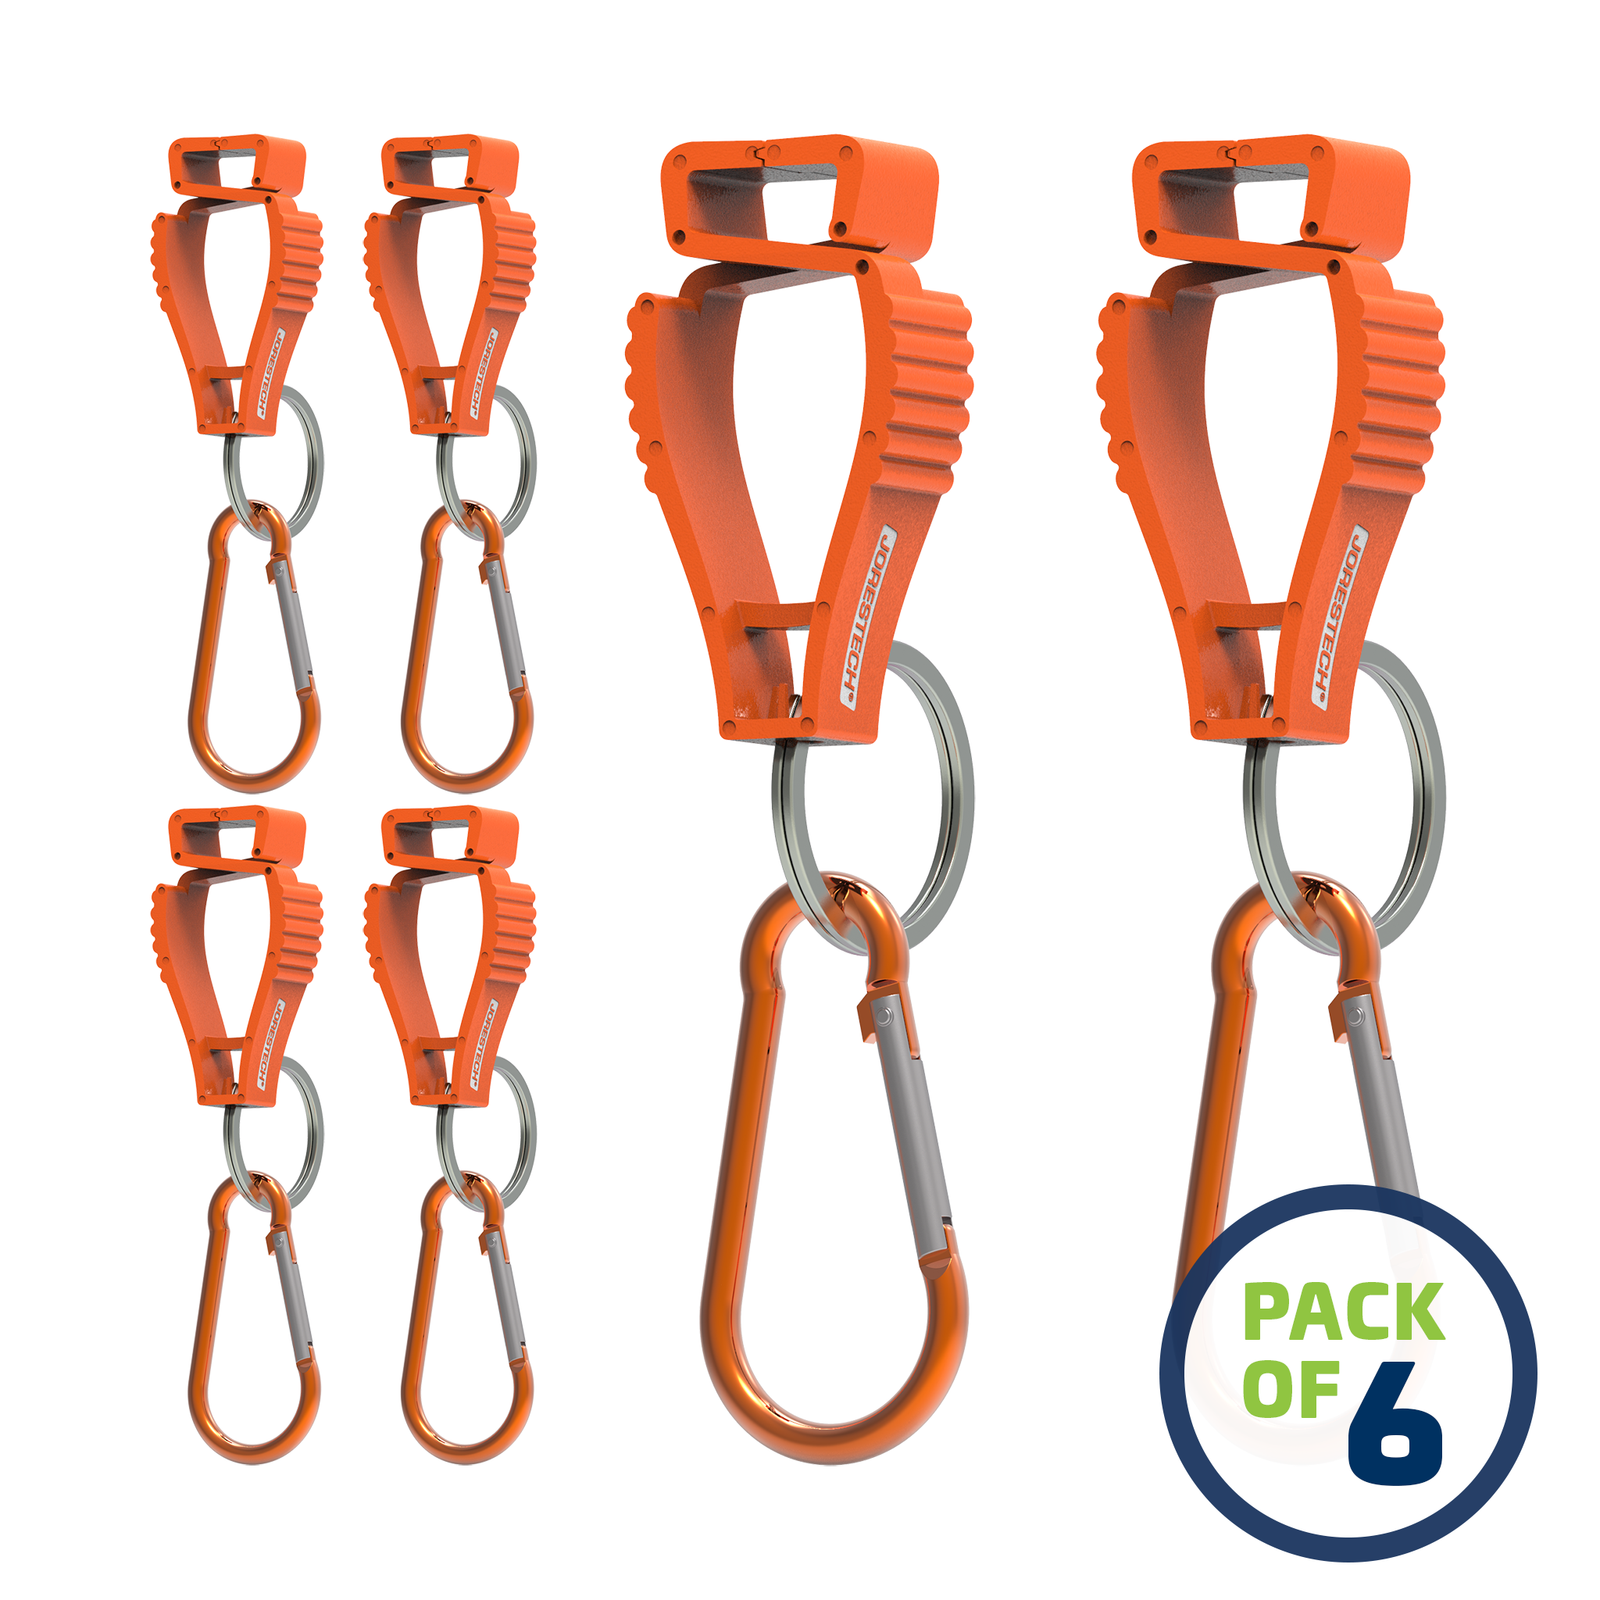 image of a pack of 6 Orange JORESTECH glove clip safety holders with carabiner over white background